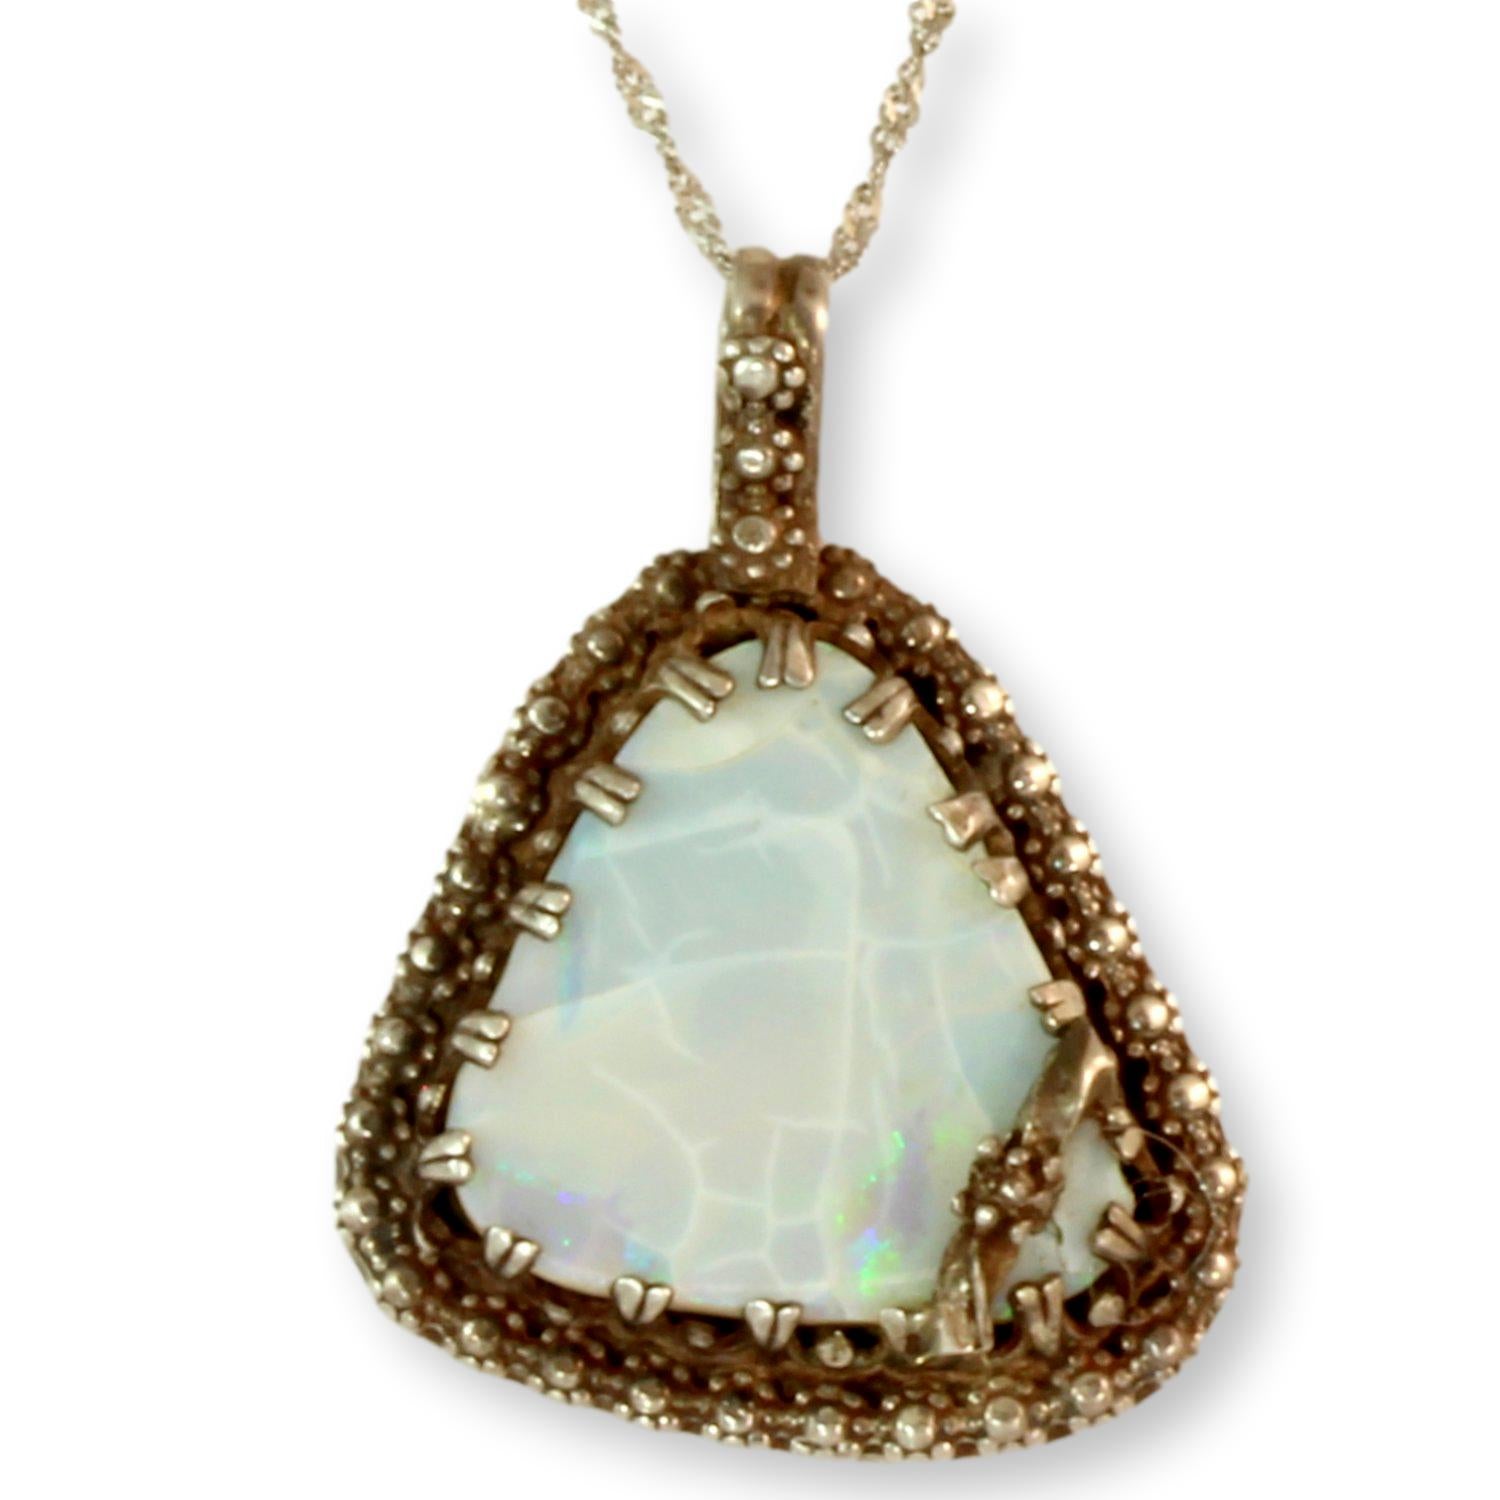 Buy Natural Opal Pendant Necklace Online in India - Mypoojabox.in